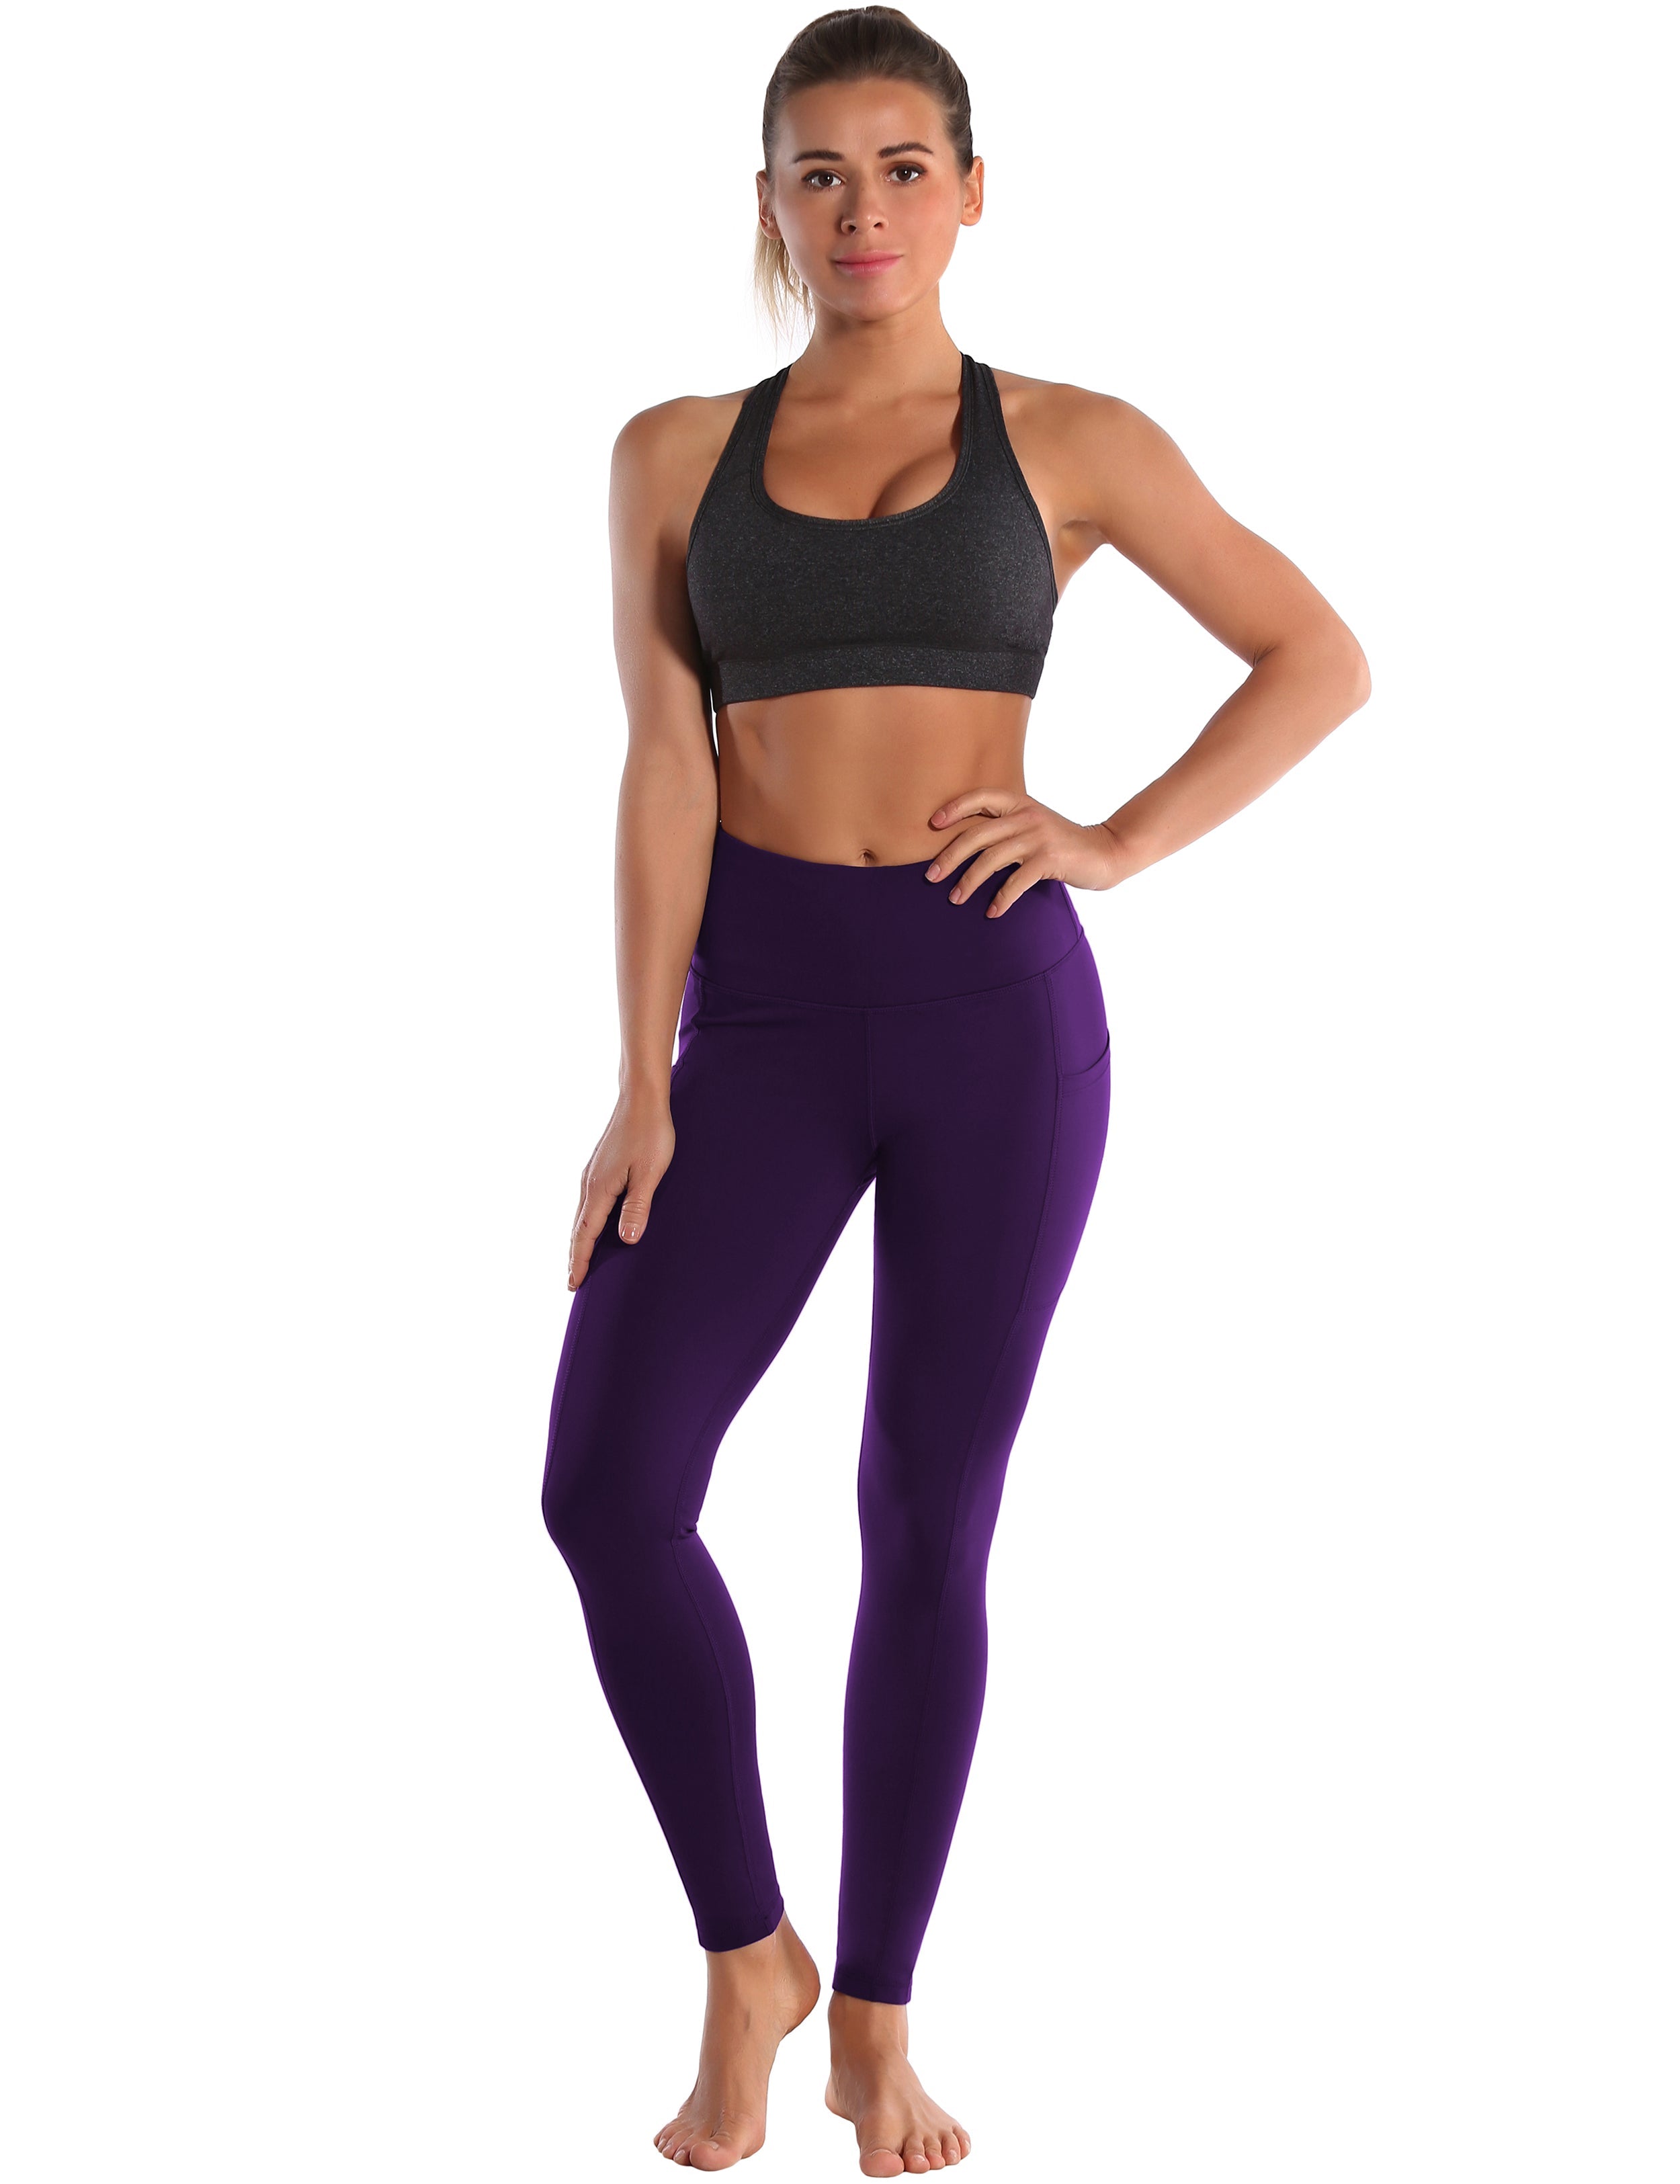 Hip Line Side Pockets Jogging Pants eggplantpurple Sexy Hip Line Side Pockets 75%Nylon/25%Spandex Fabric doesn't attract lint easily 4-way stretch No see-through Moisture-wicking Tummy control Inner pocket Two lengths